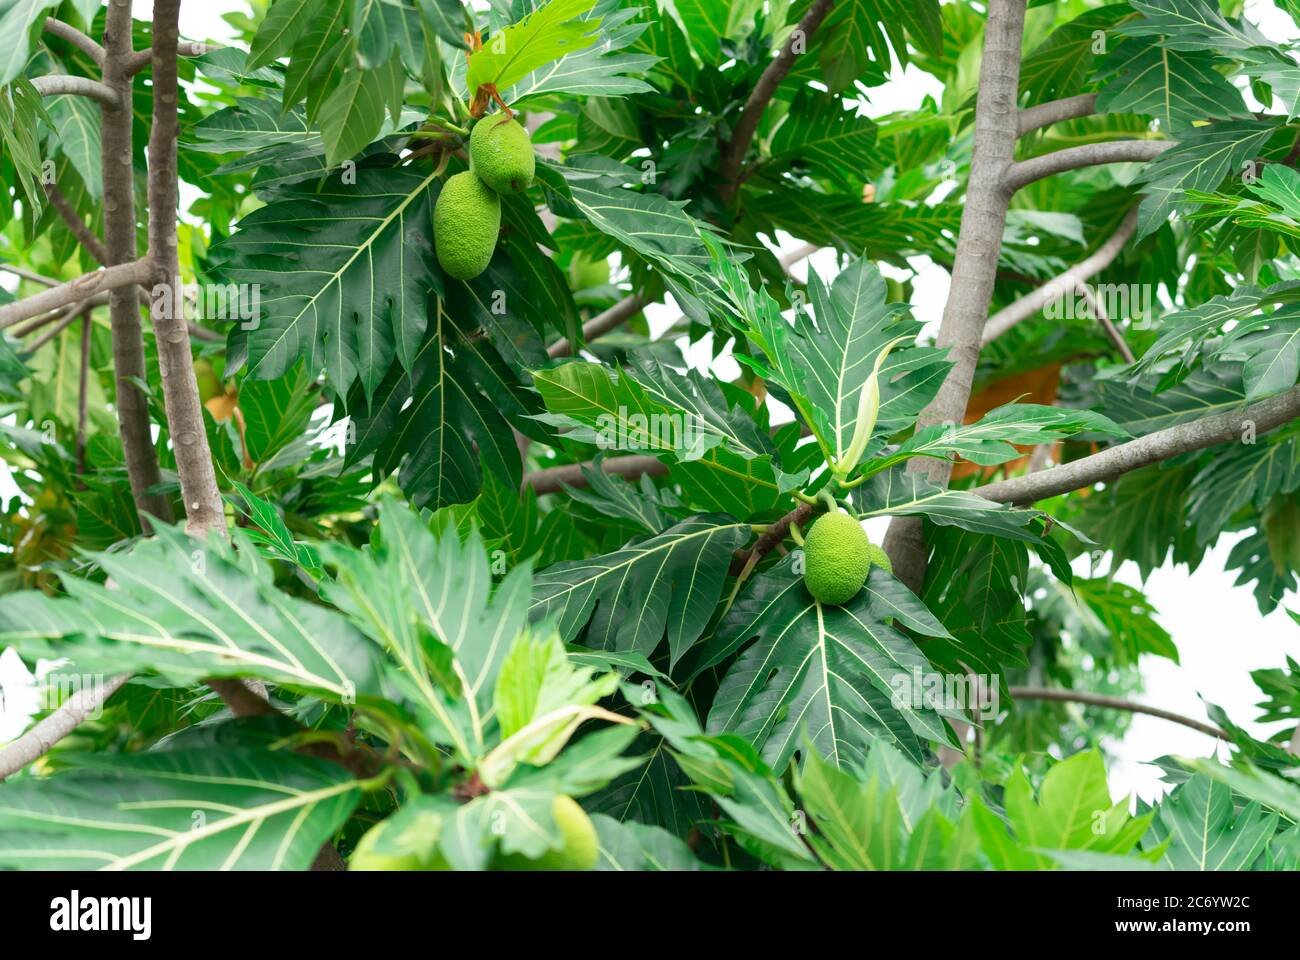 Breadfruit on breadfruit tree with green leaves in the garden. Tropical tree with thick leaves are deeply cut. Flowering tree. Staple food. Plant Stock Photo